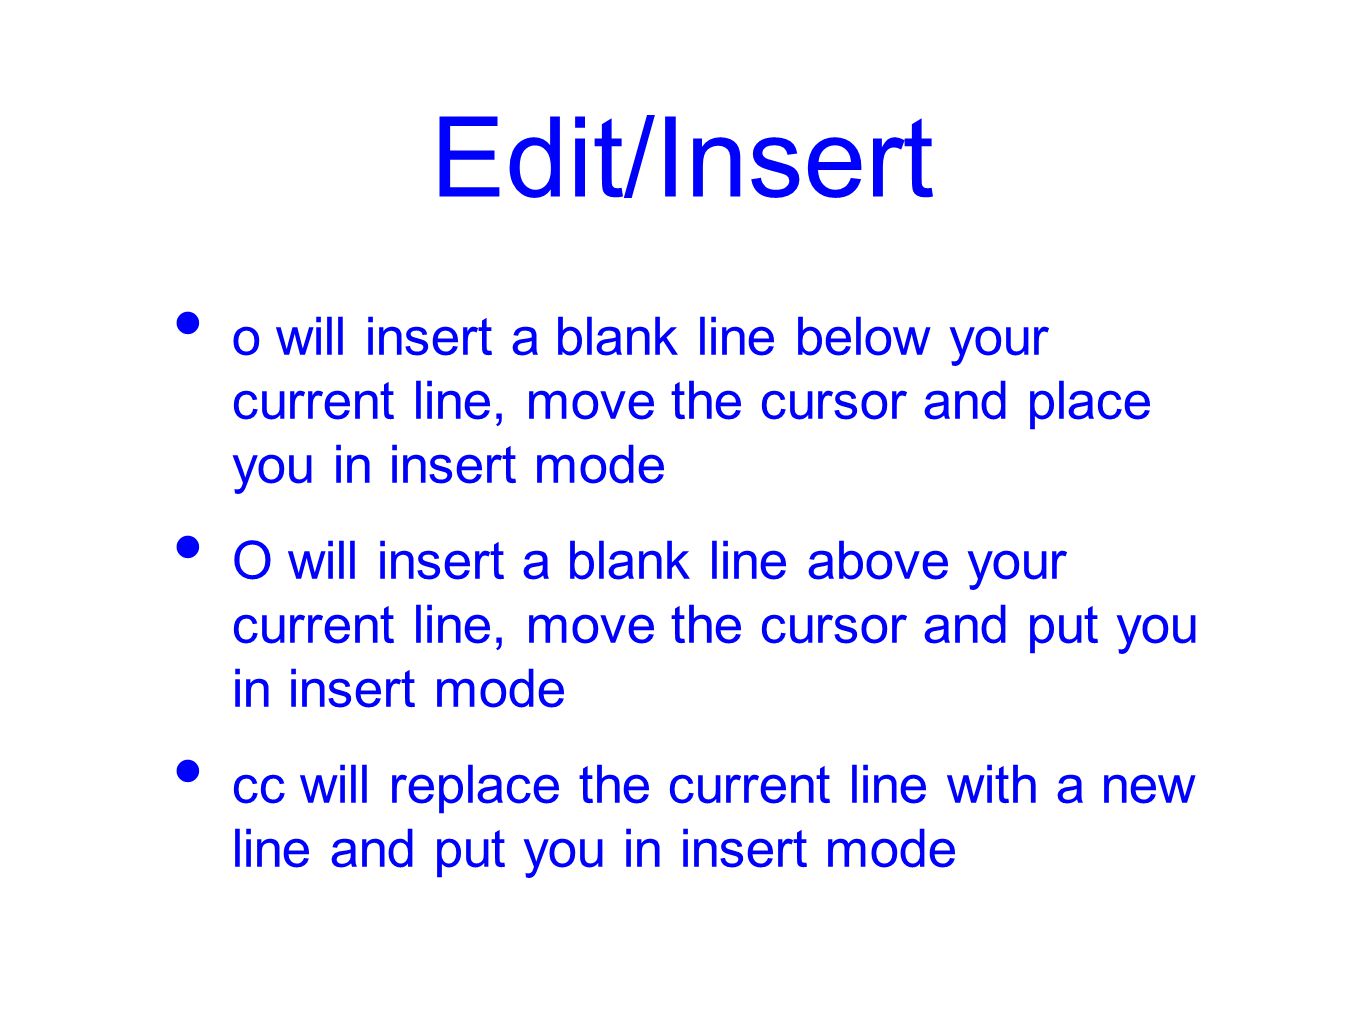 Edit/Insert o will insert a blank line below your current line, move the cursor and place you in insert mode O will insert a blank line above your current line, move the cursor and put you in insert mode cc will replace the current line with a new line and put you in insert mode